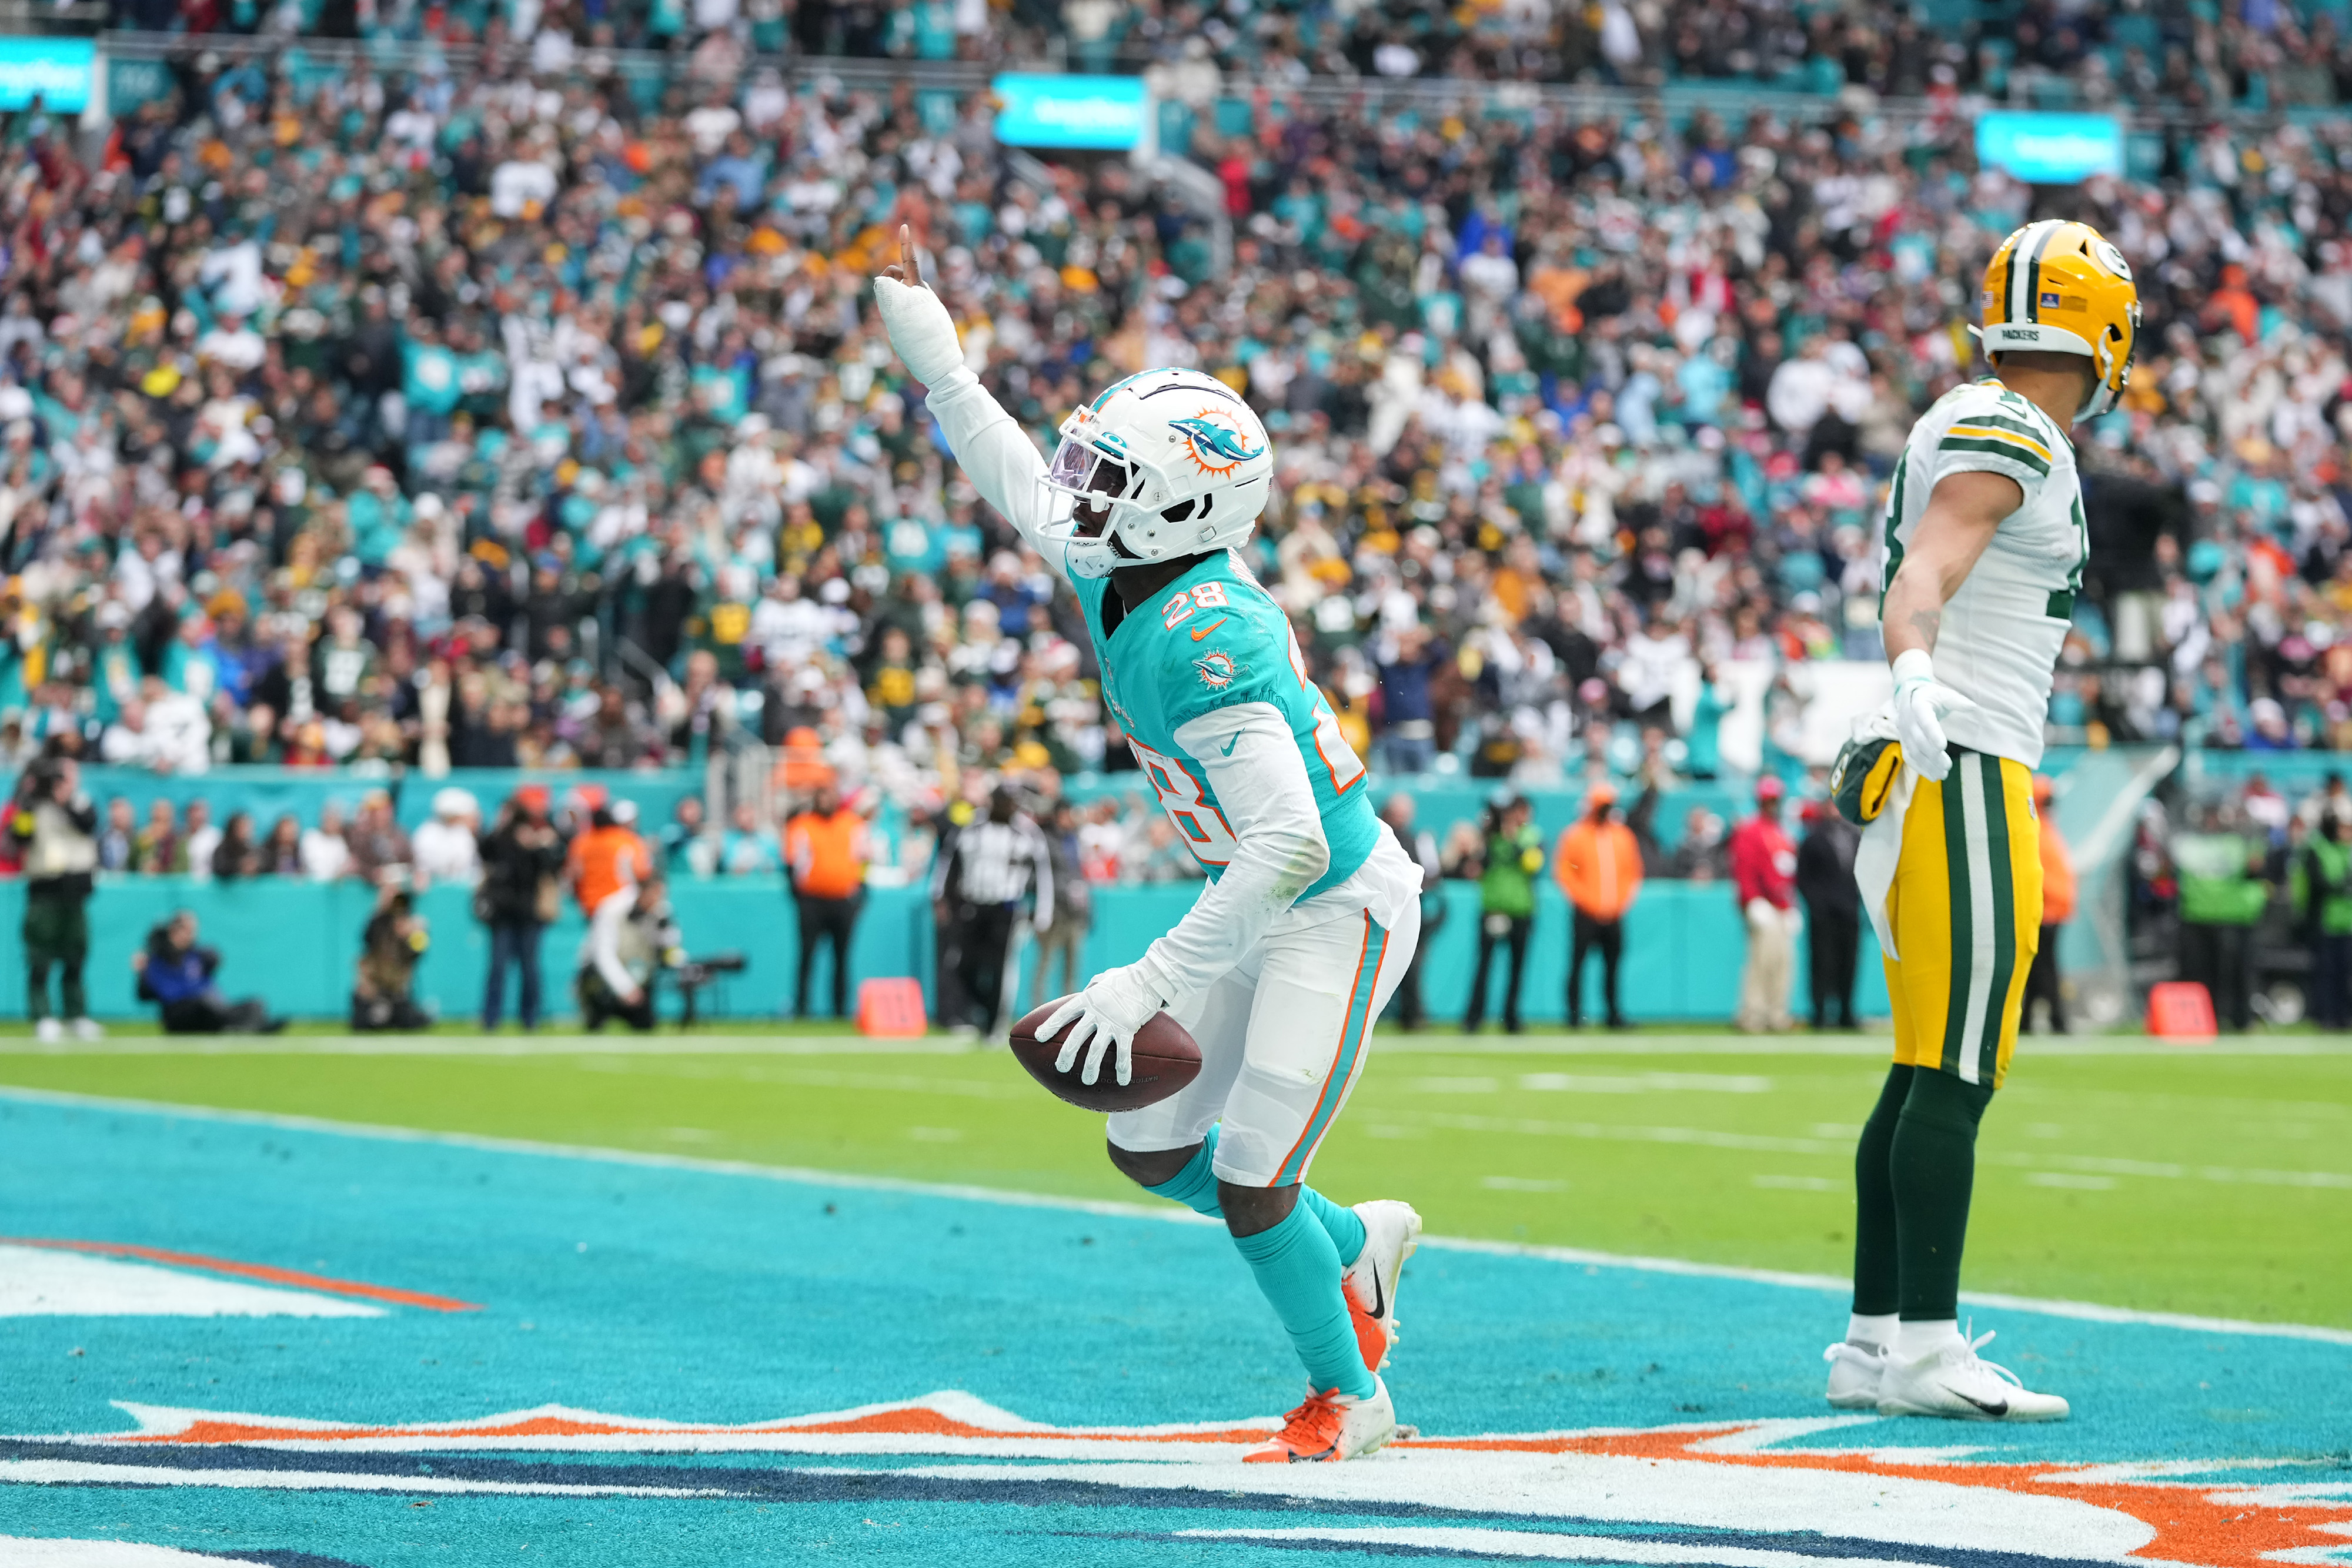 NFL: Green Bay Packers at Miami Dolphins